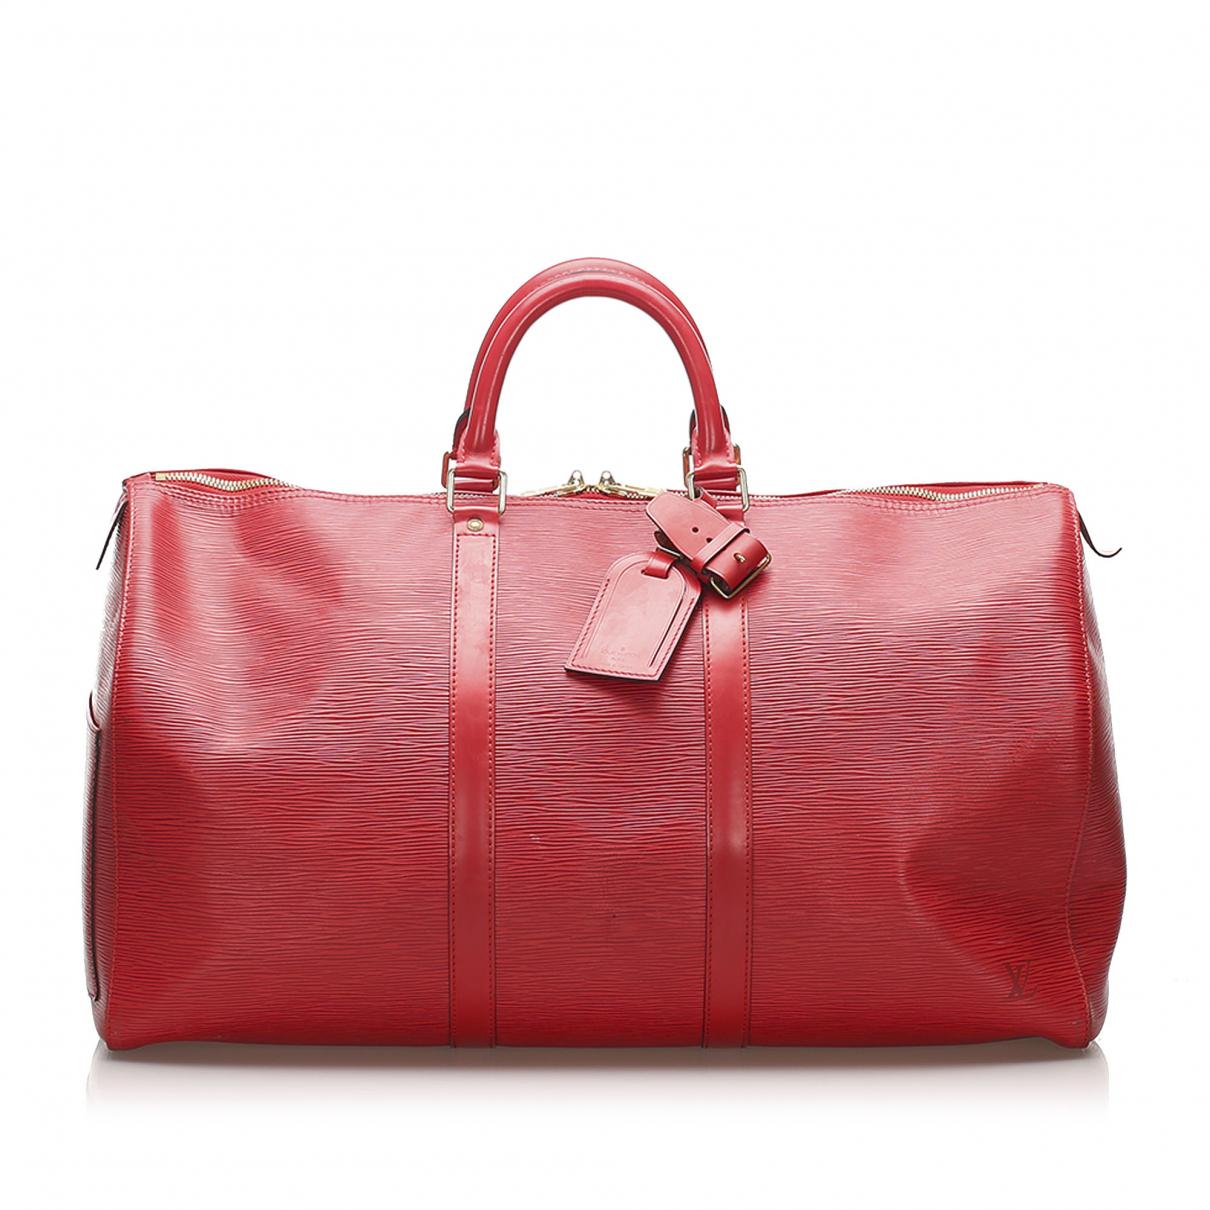 Louis Vuitton Keepall Leather 48h Bag in Red - Lyst